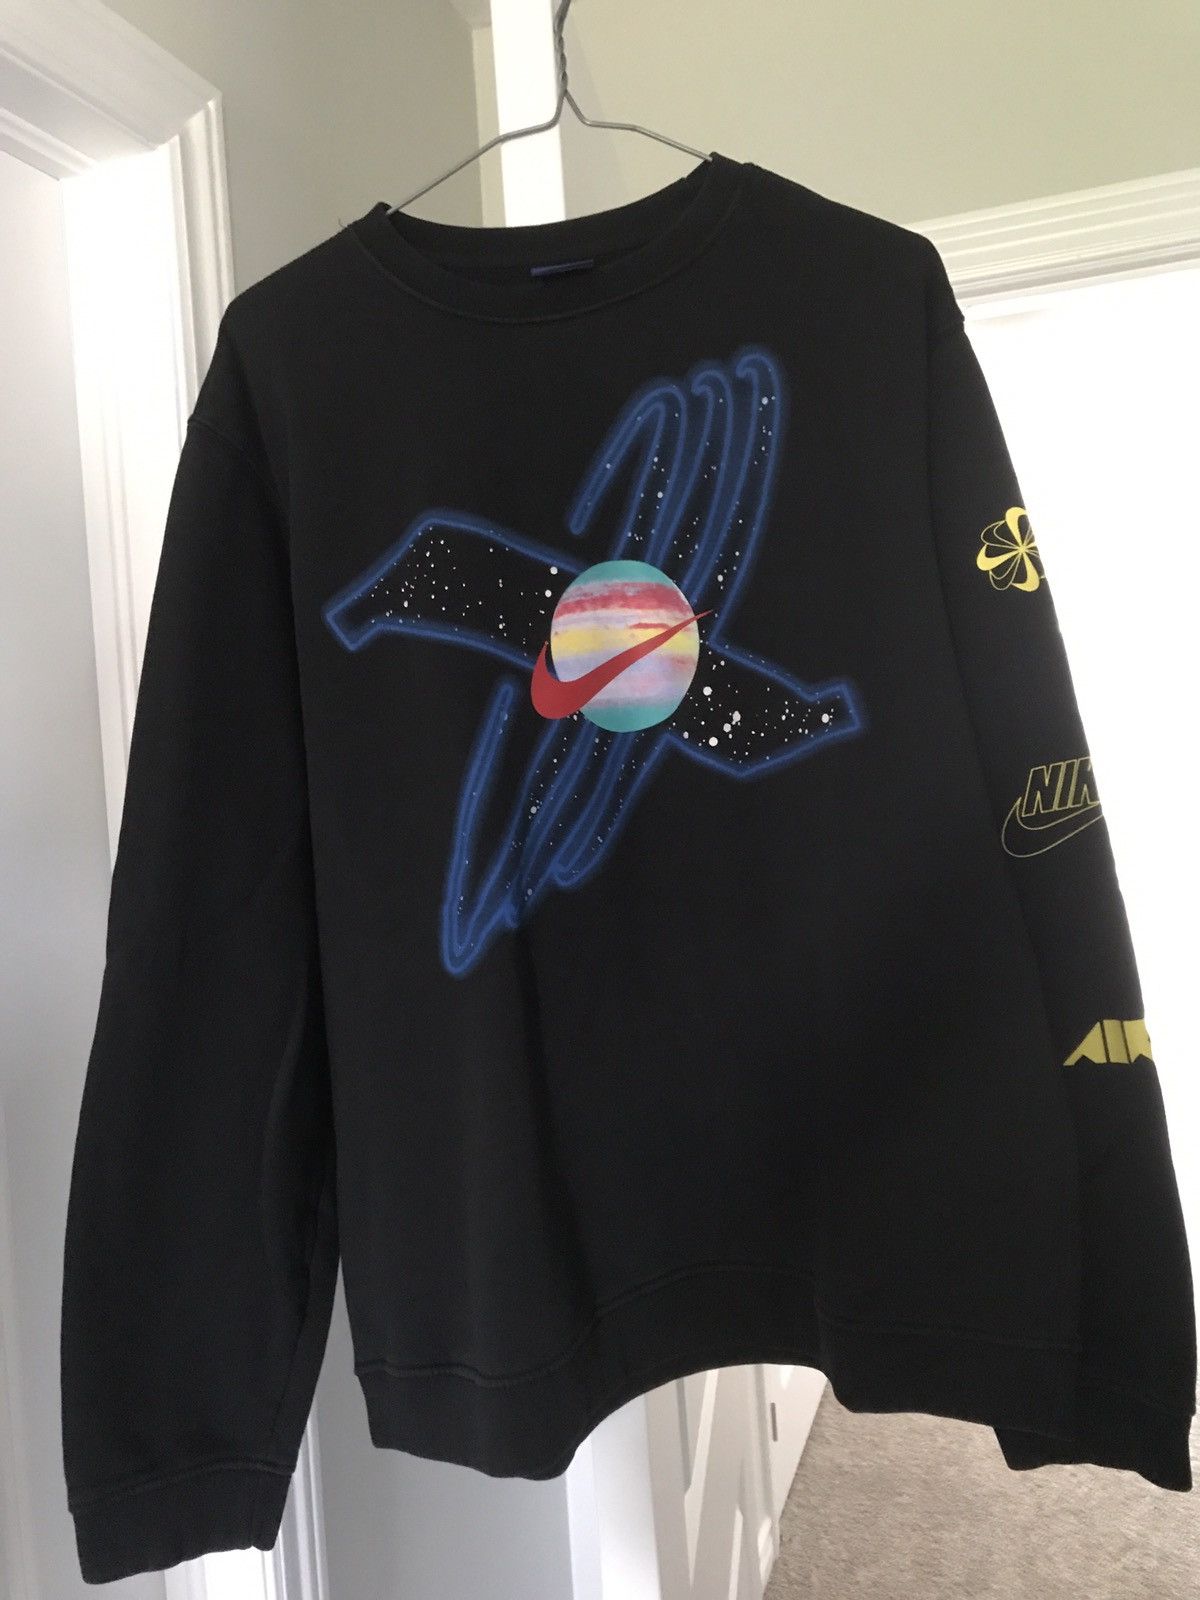 Nike LIMITED EDITION NIKE GALAXY GLOW IN THE DARK SWEATER Size US L / EU 52-54 / 3 - 1 Preview